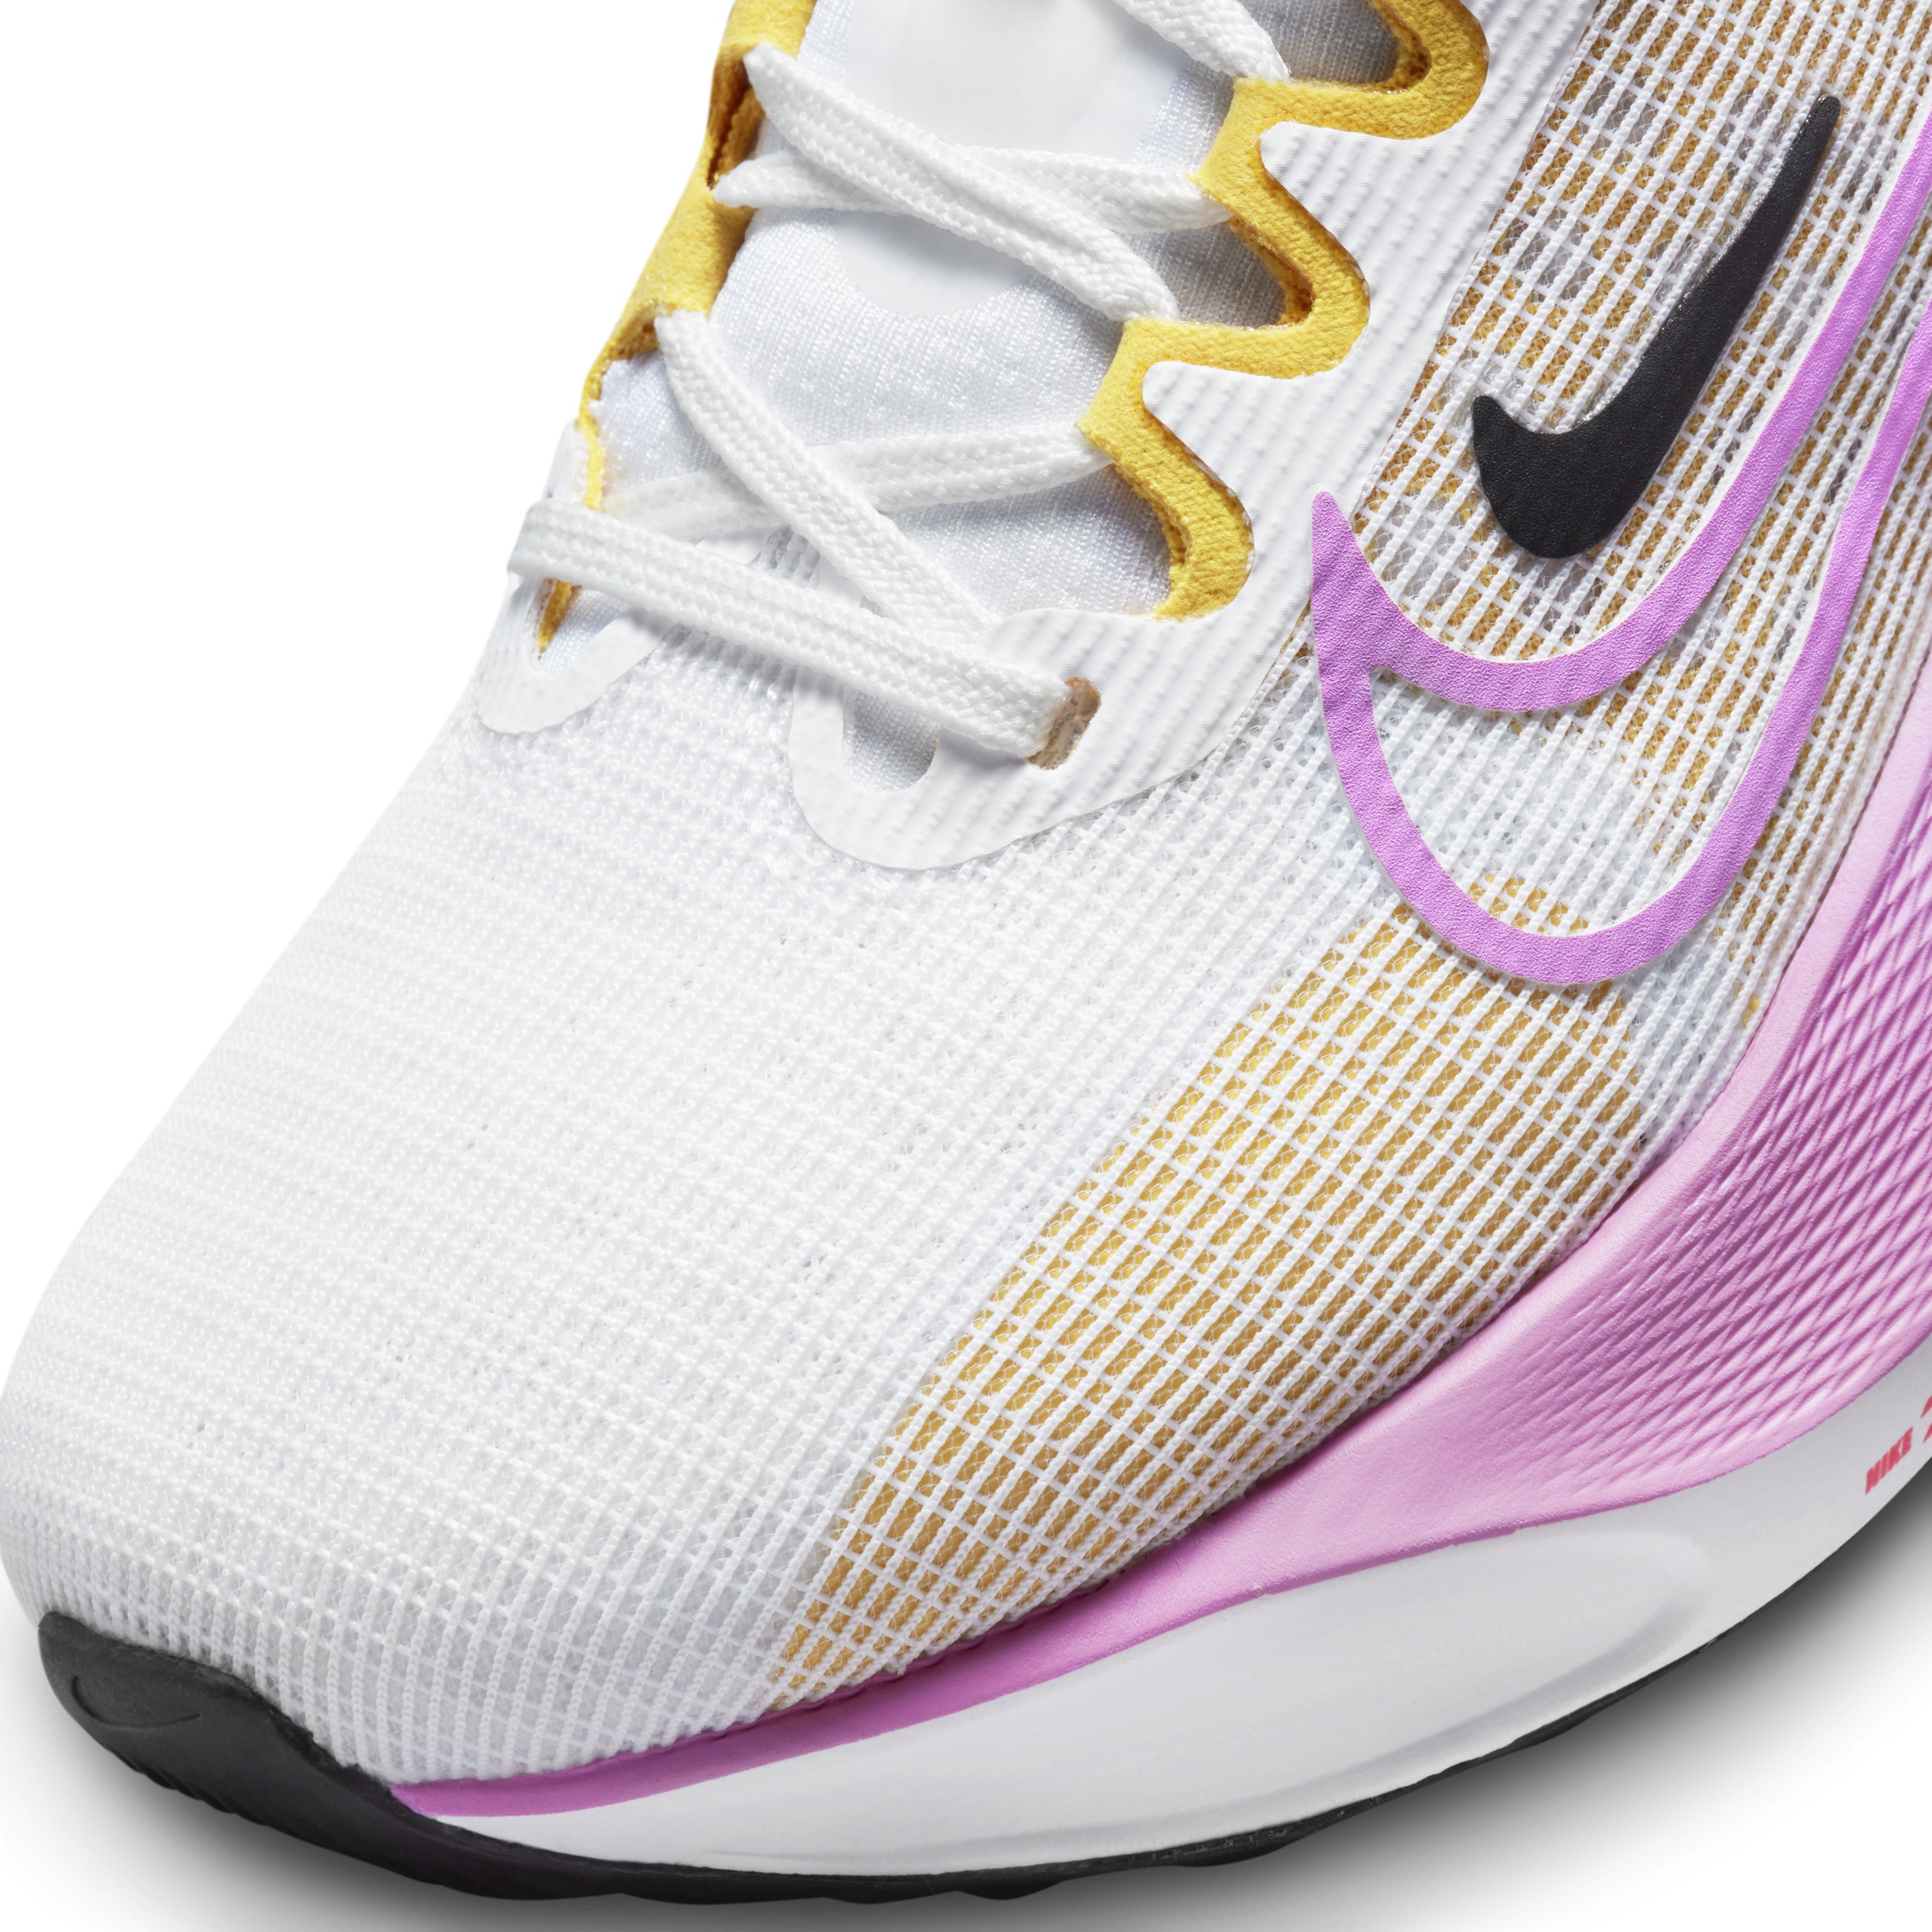 Nike Women's Zoom Fly 5 Road Running Shoes - 7